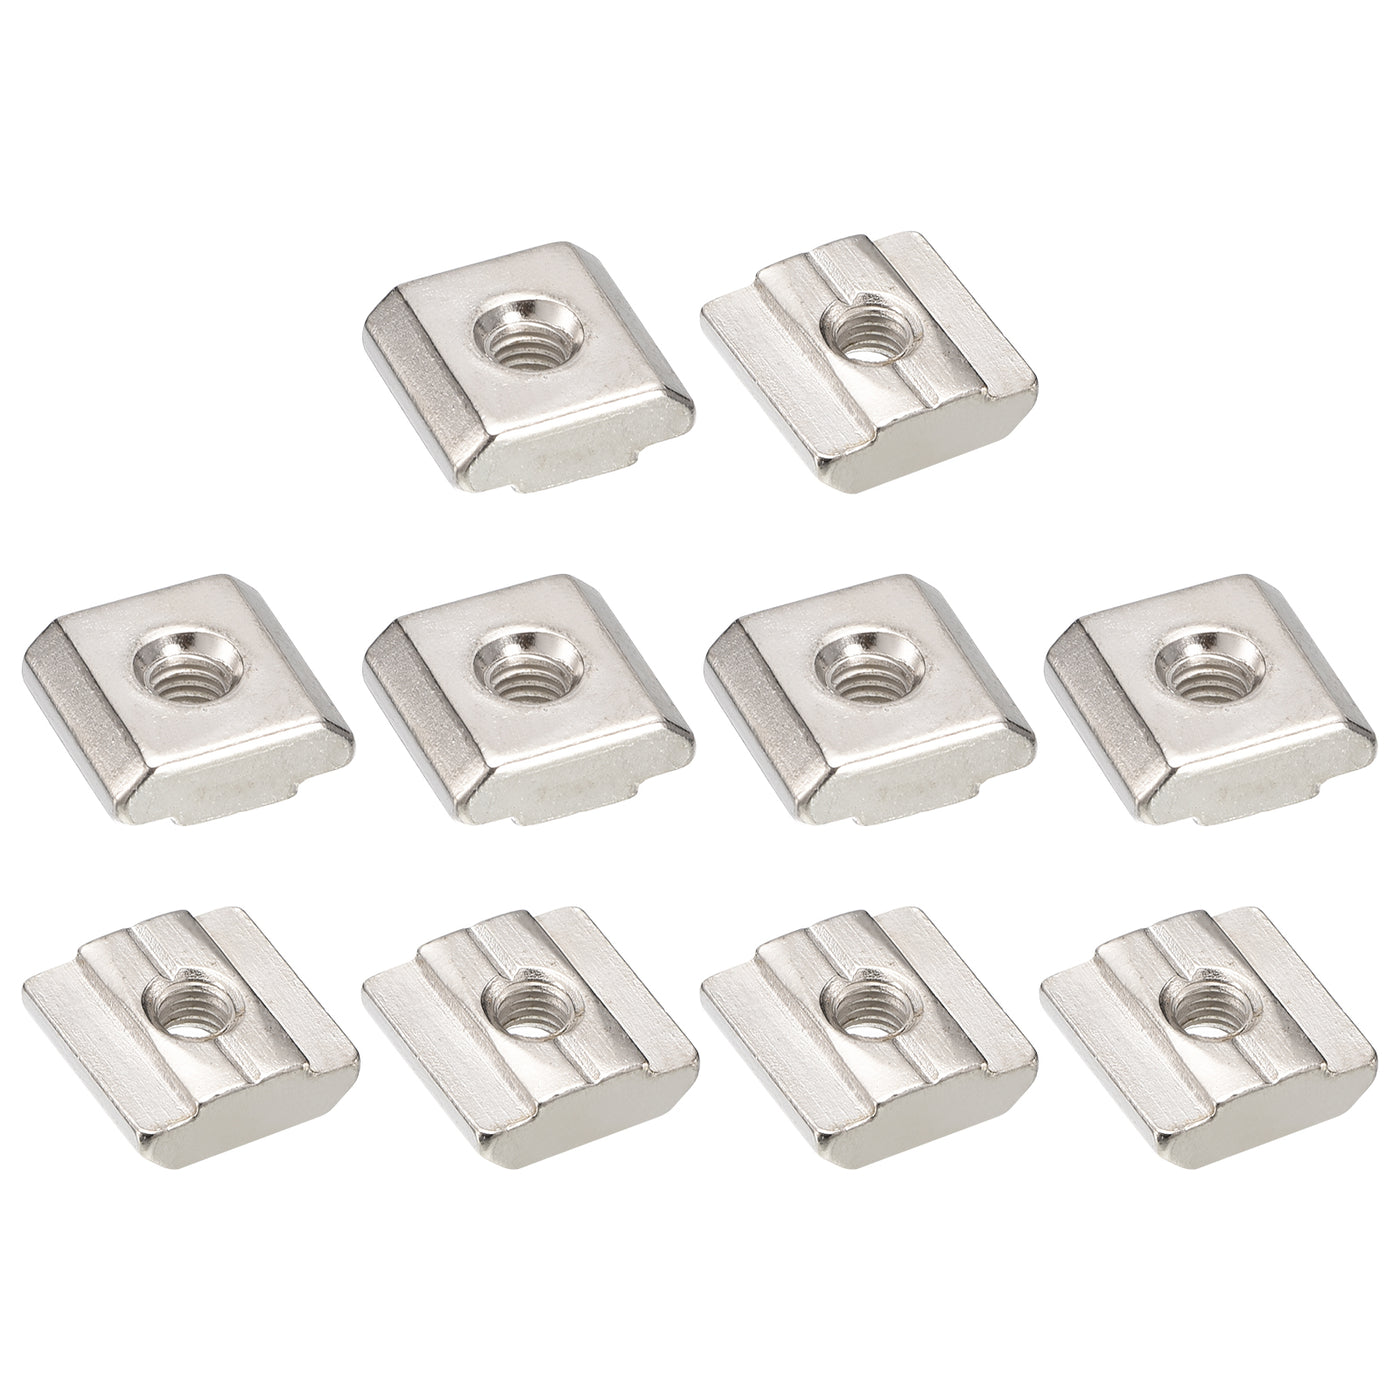 uxcell Uxcell T Nuts, 50pcs - Nickel Plated Carbon Steel T Slot Bolts, 3030 Series M5 Hammer Head Fastener, Sliding T Nuts for Aluminum Extrusion Profile (Silver)